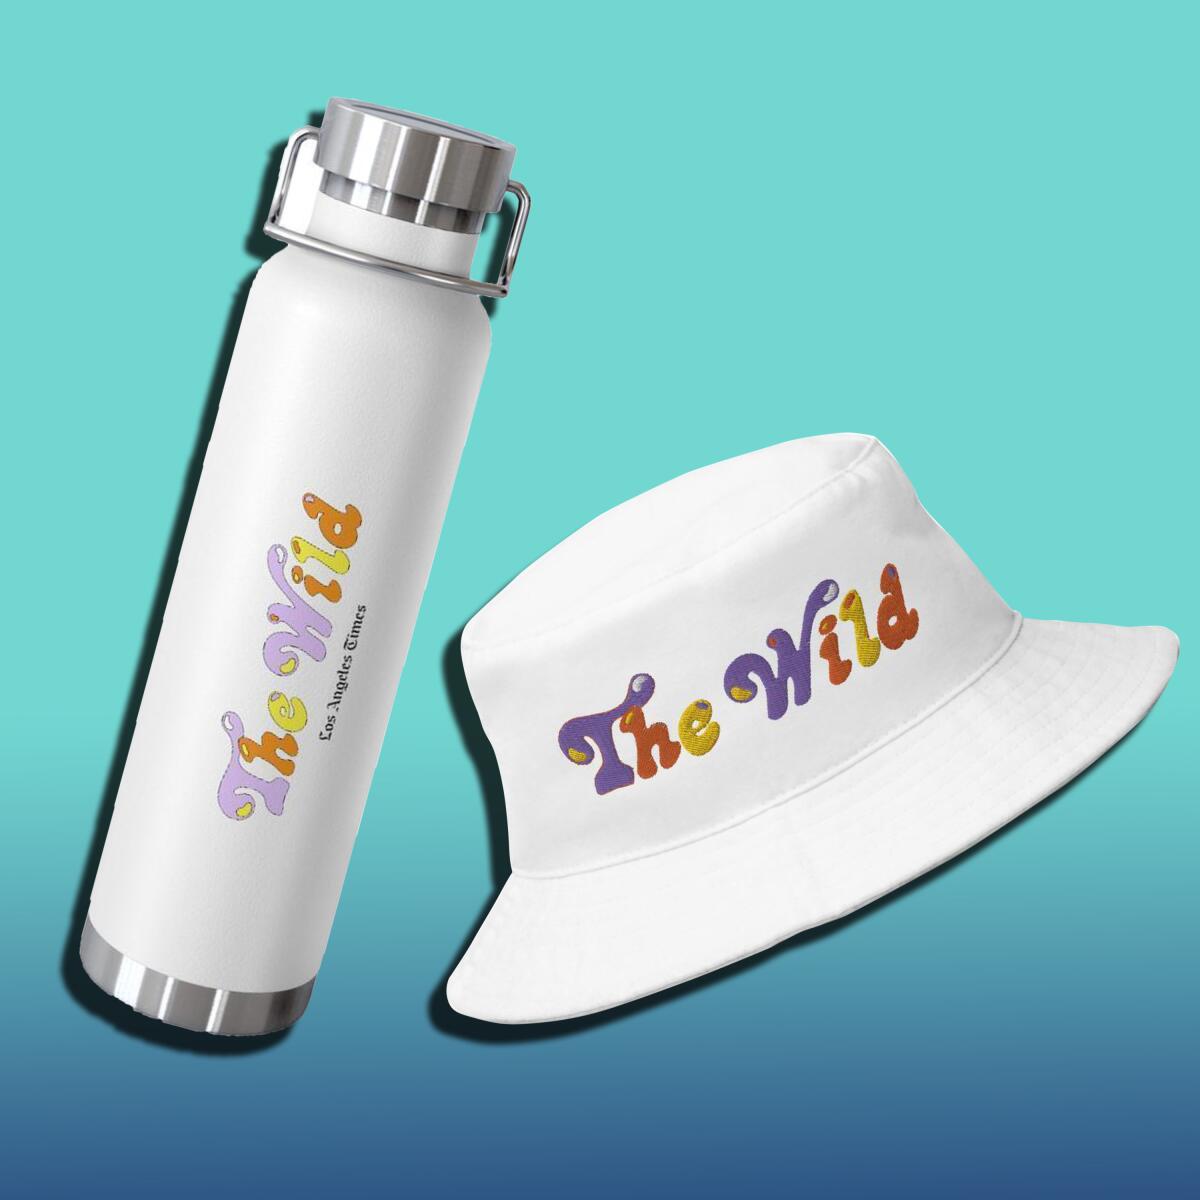 A water bottle and bucket hat that say "The Wild"